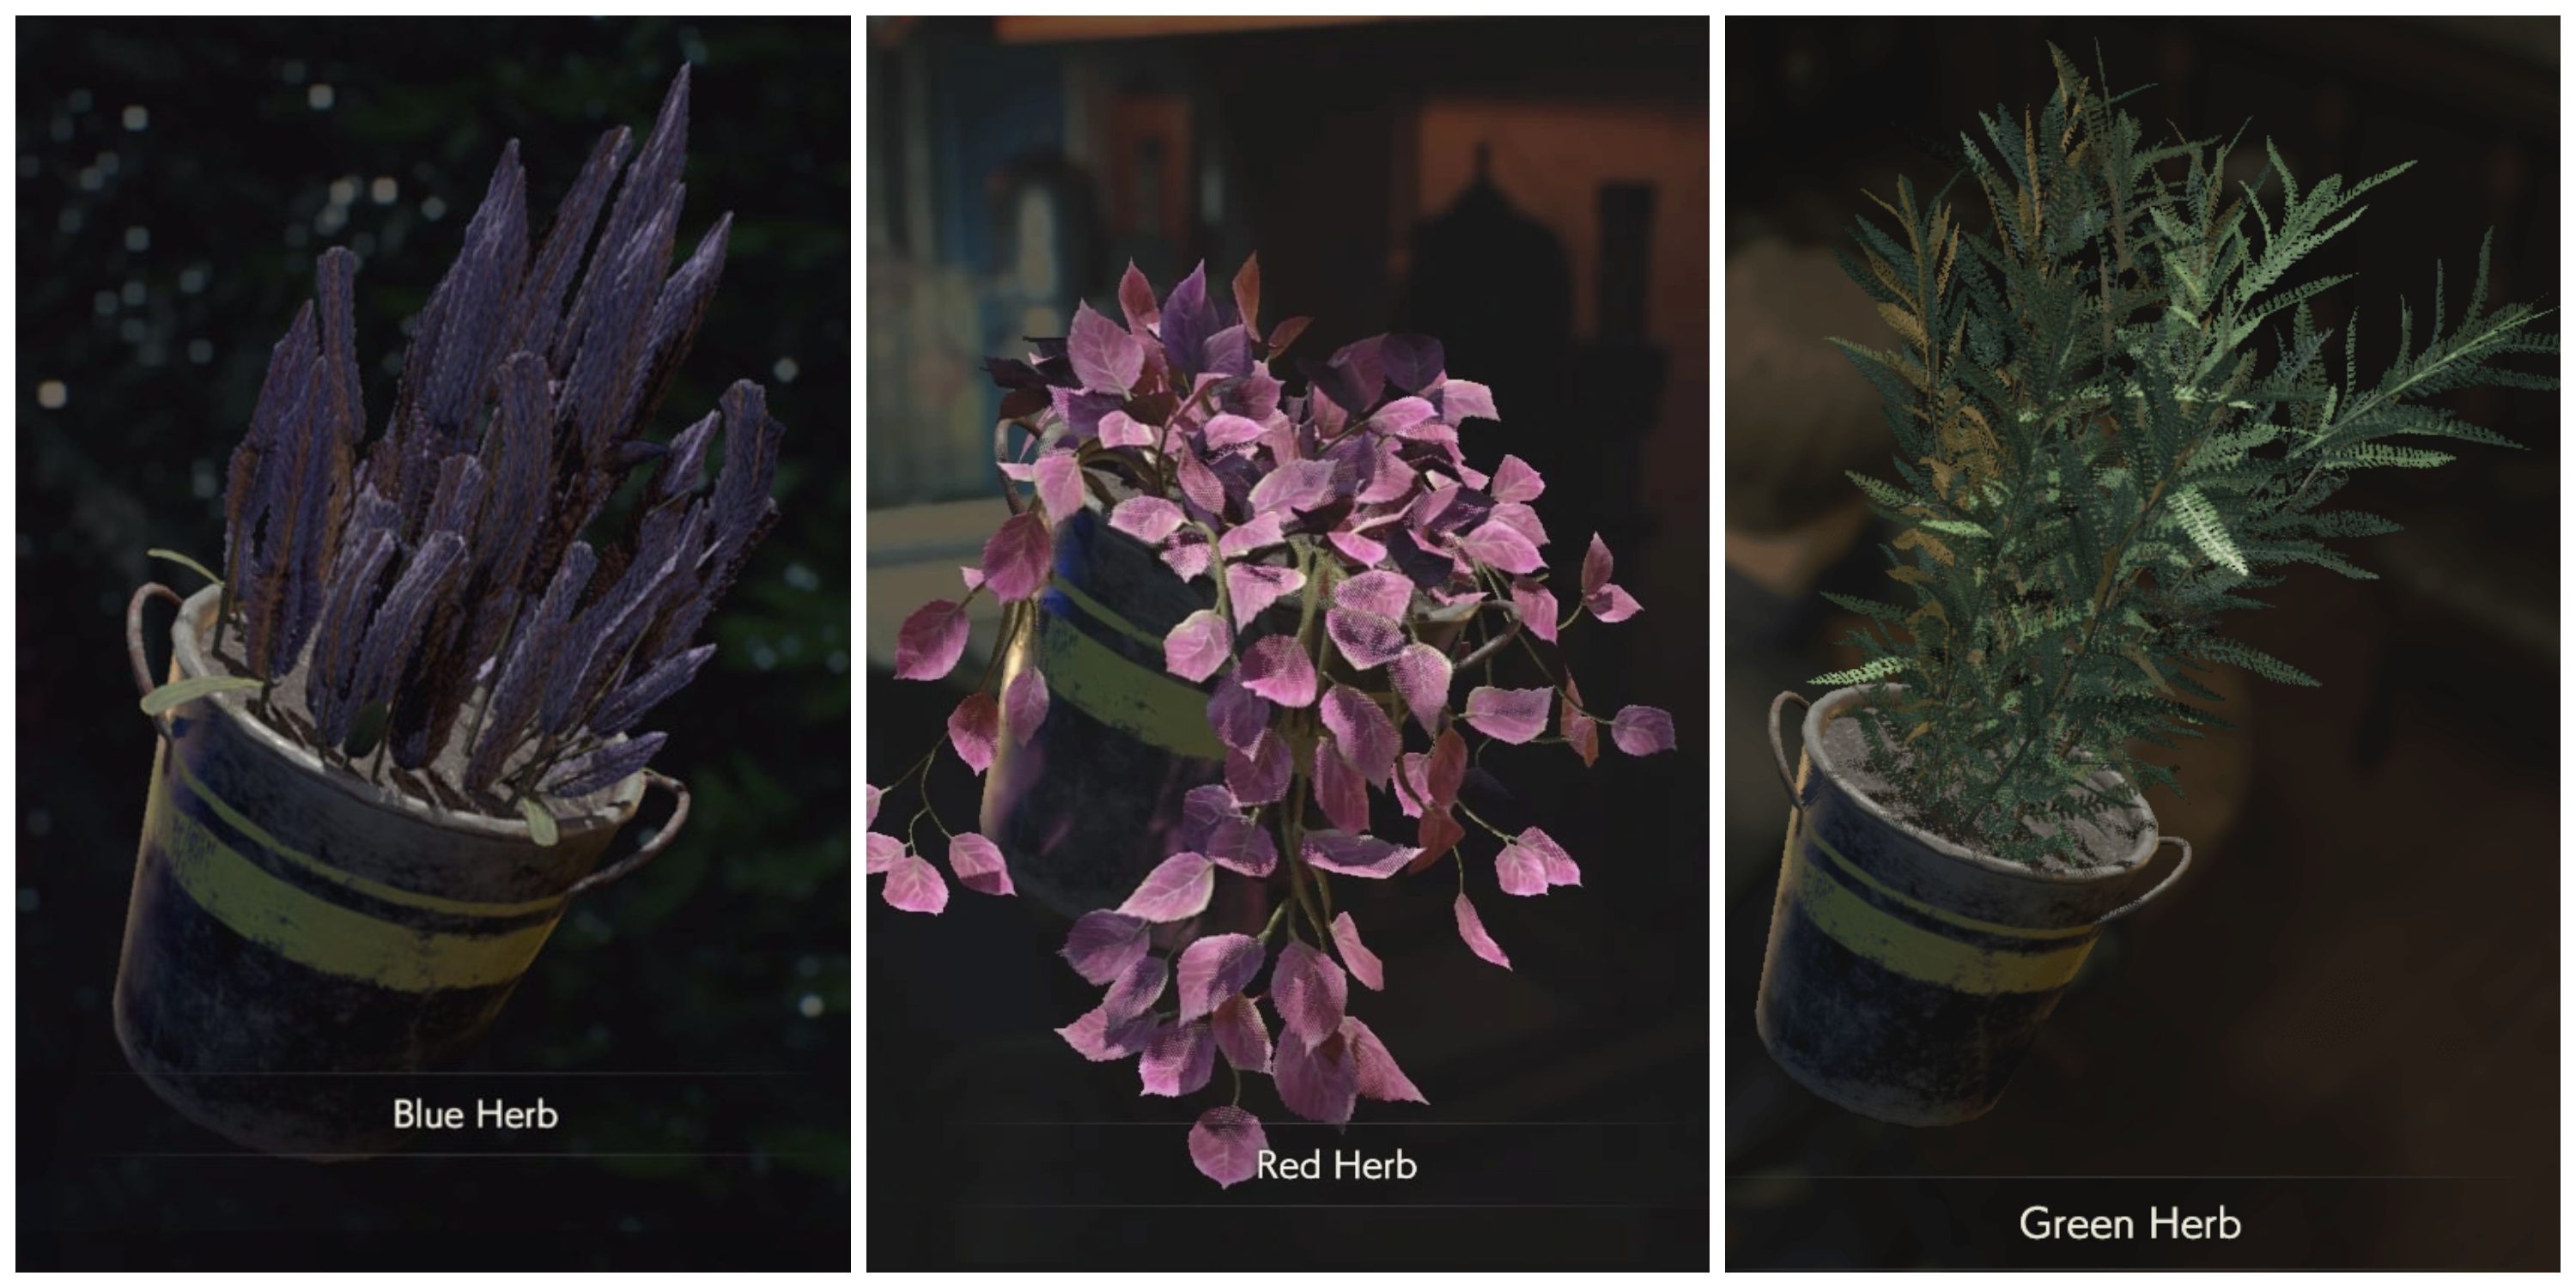 blue herb, red herb, green herb in resident evil 2